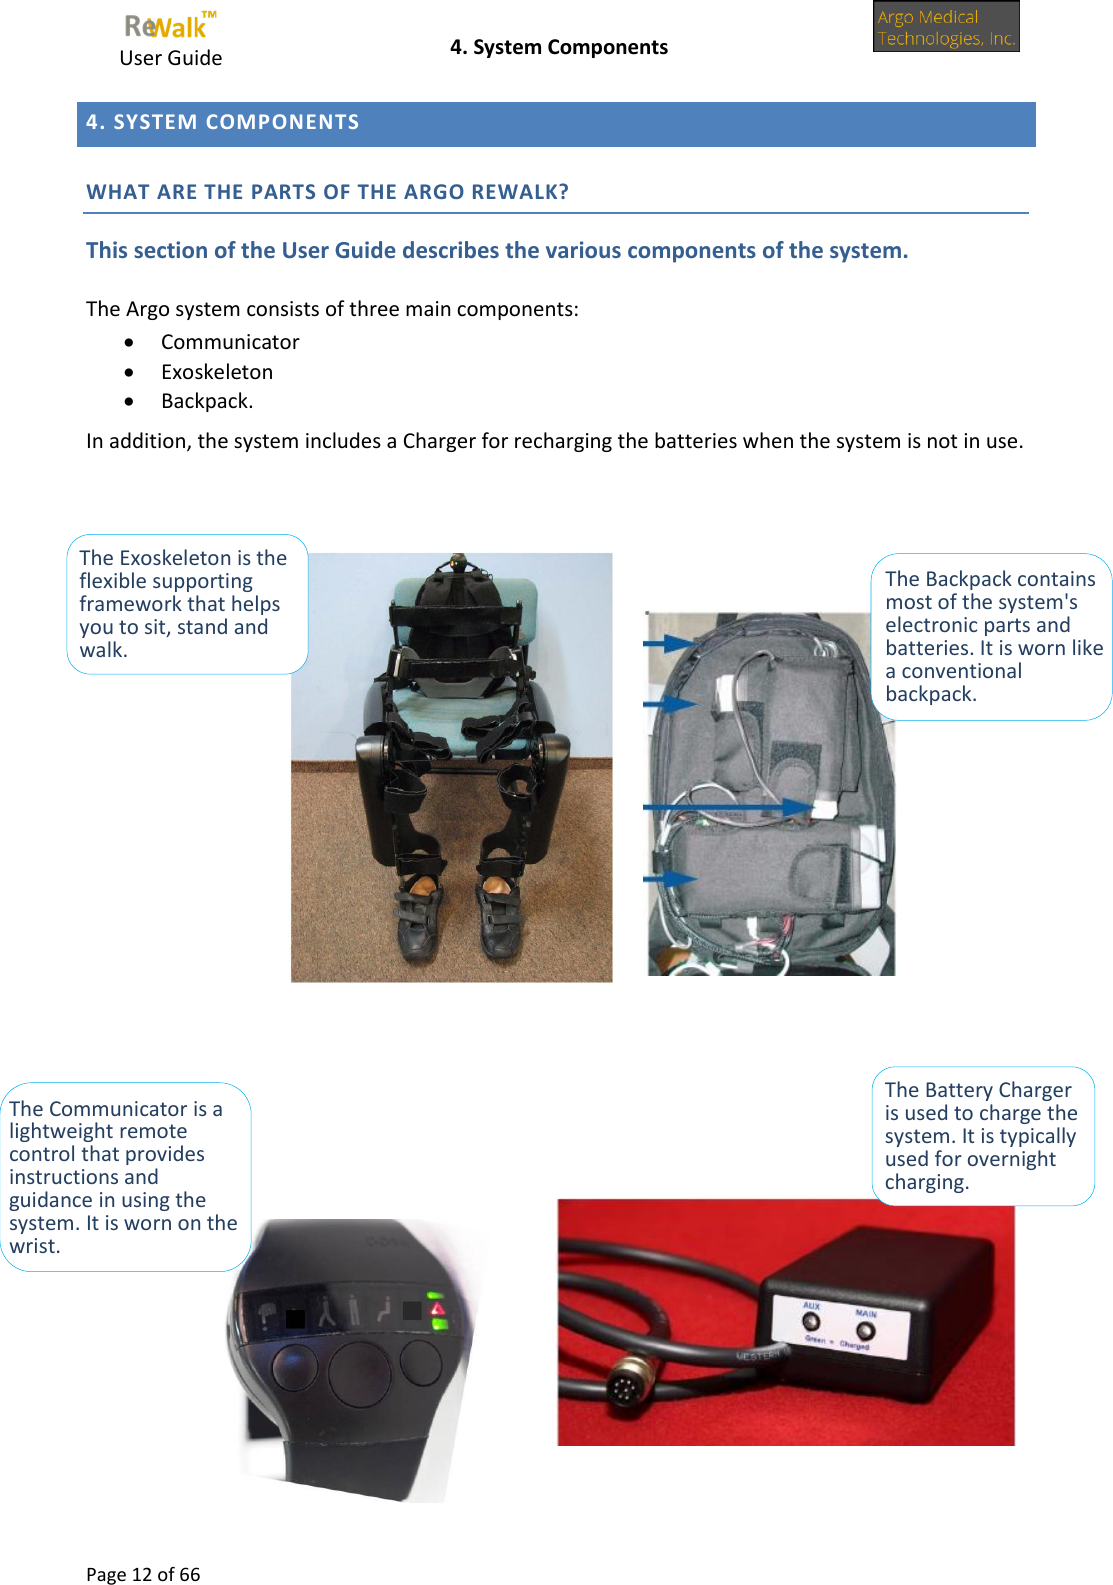     User Guide    4. System Components  Page 12 of 66  4. SYSTEM COMPONENTS WHAT ARE THE PARTS OF THE ARGO REWALK? This section of the User Guide describes the various components of the system. The Argo system consists of three main components:  Communicator  Exoskeleton  Backpack. In addition, the system includes a Charger for recharging the batteries when the system is not in use.              The Exoskeleton is the flexible supporting framework that helps you to sit, stand and walk. The Backpack contains most of the system&apos;s electronic parts and batteries. It is worn like a conventional backpack. The Battery Charger is used to charge the system. It is typically used for overnight charging. The Communicator is a lightweight remote control that provides instructions and guidance in using the system. It is worn on the wrist. 